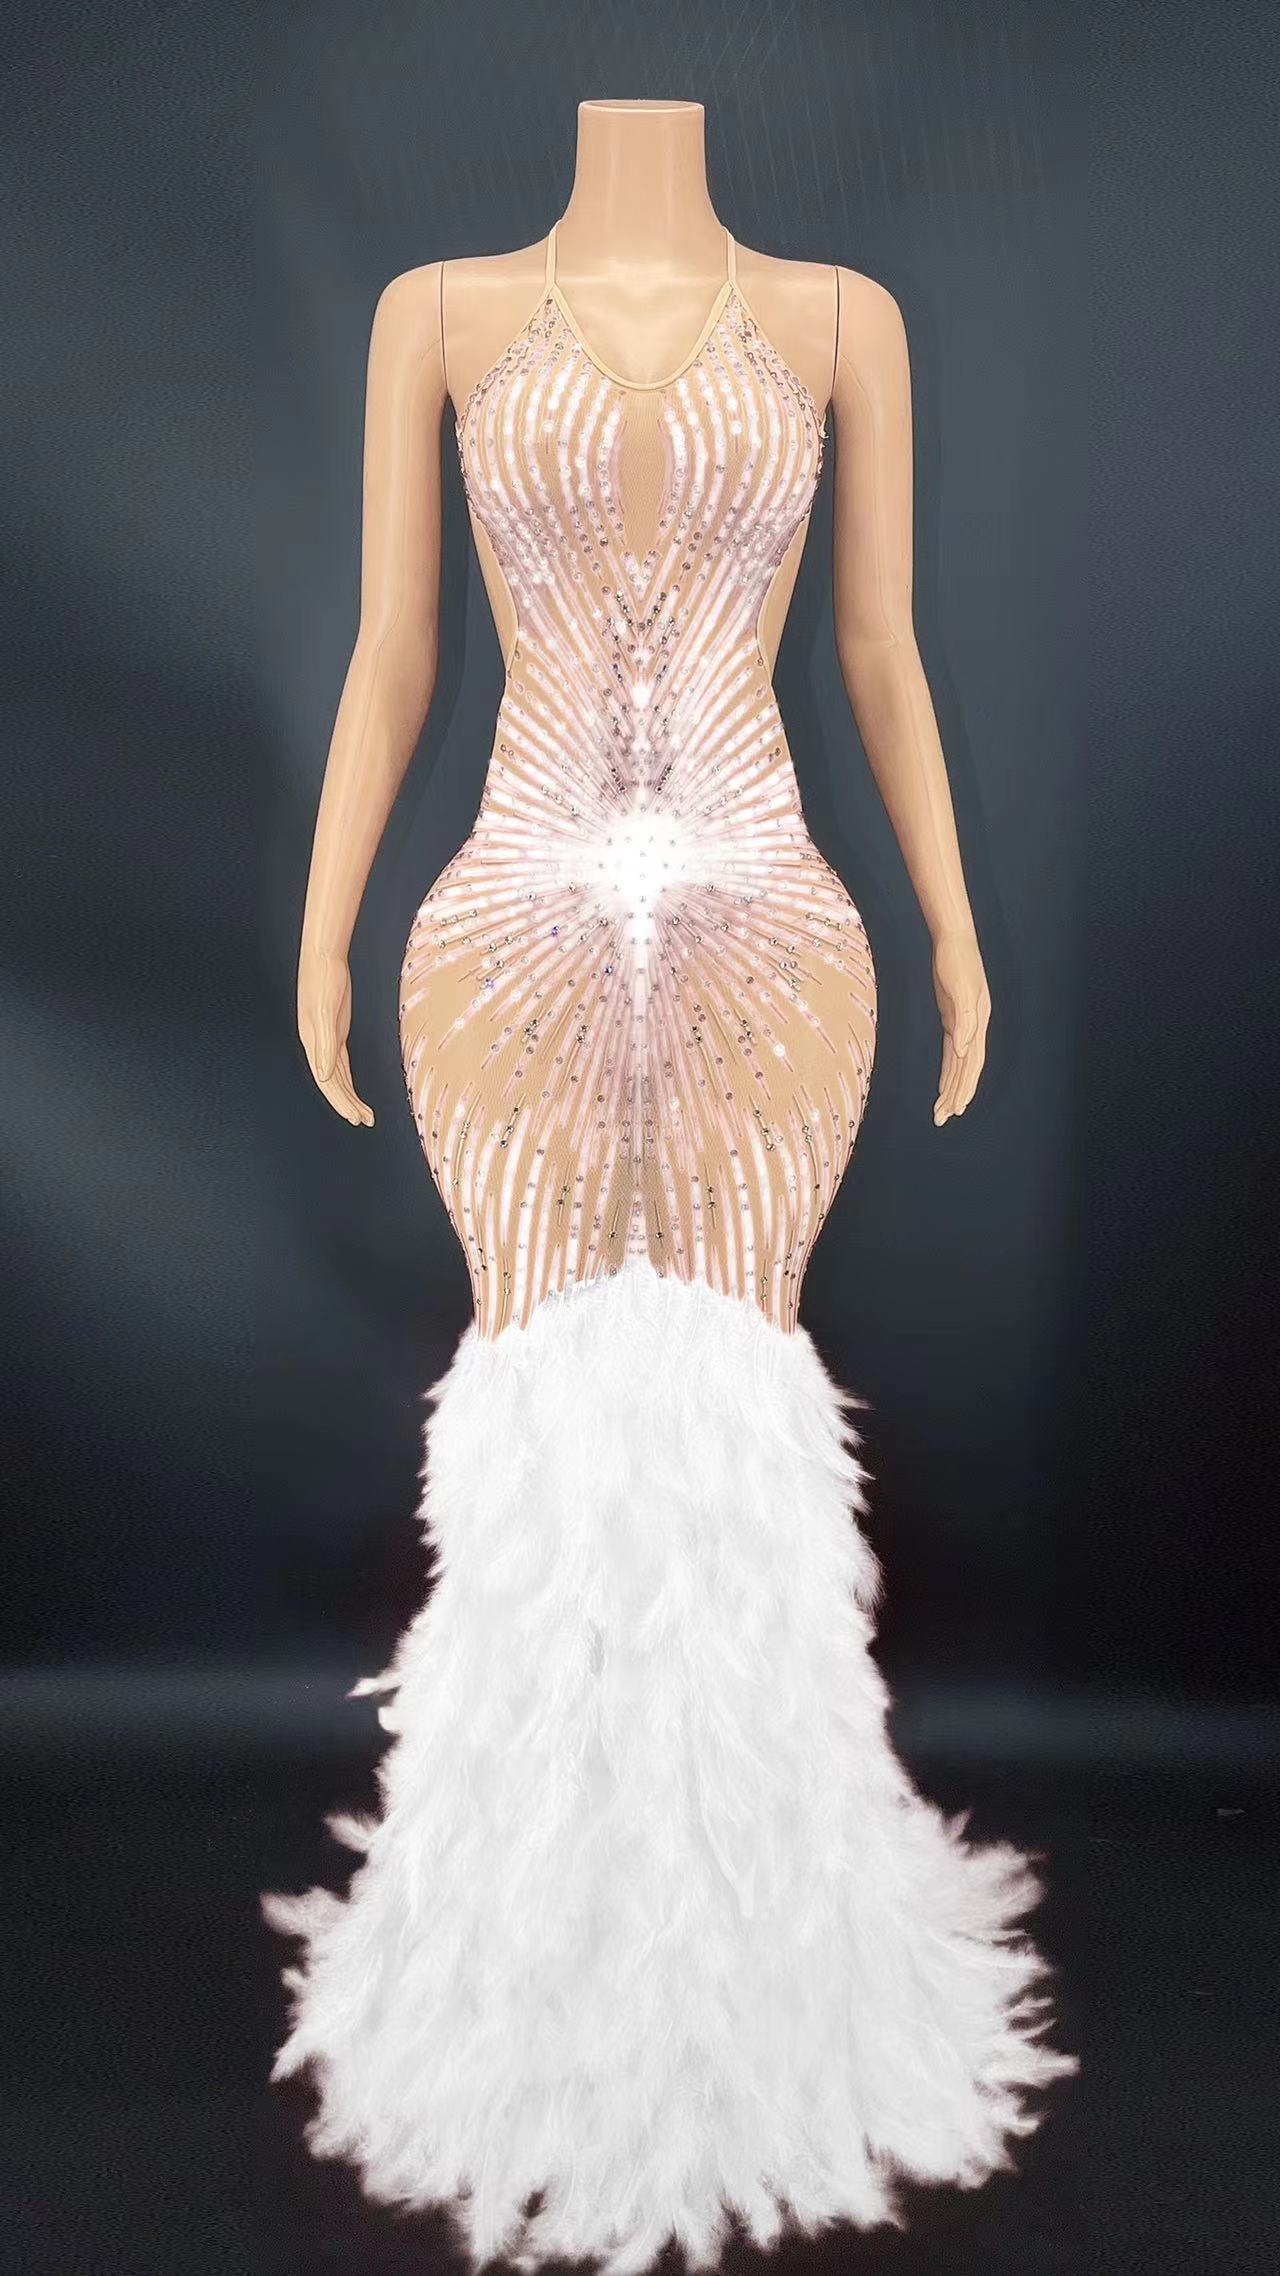 Women Sexy Sparkly Rhinestones Feathers Dress Mesh Transparent Backle